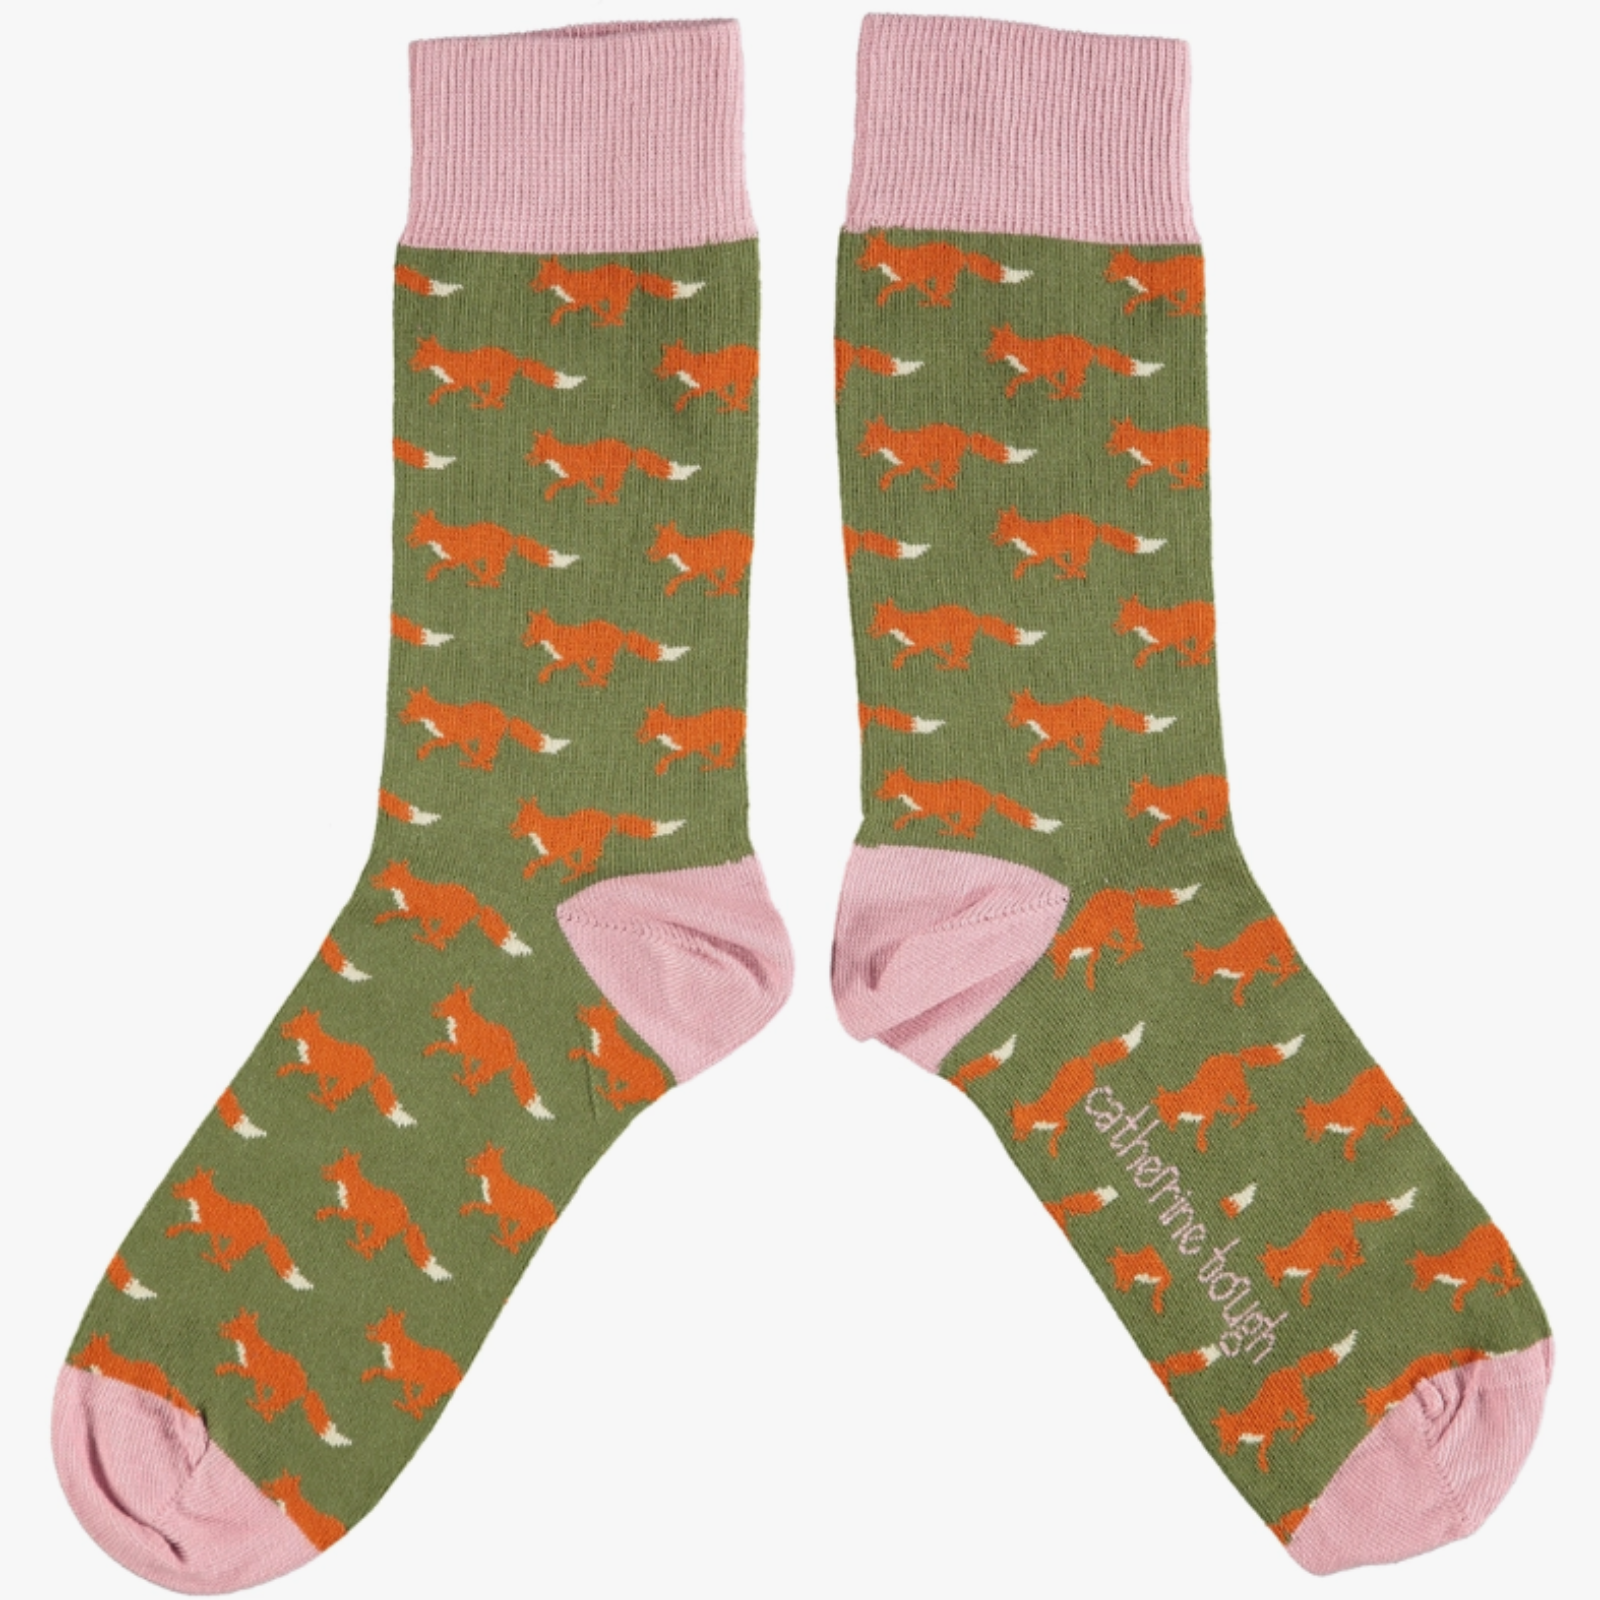 Catherine Tough women's sock - The design features rusty orange foxes on a khaki base framed with dusky pink rib, heels & toes.